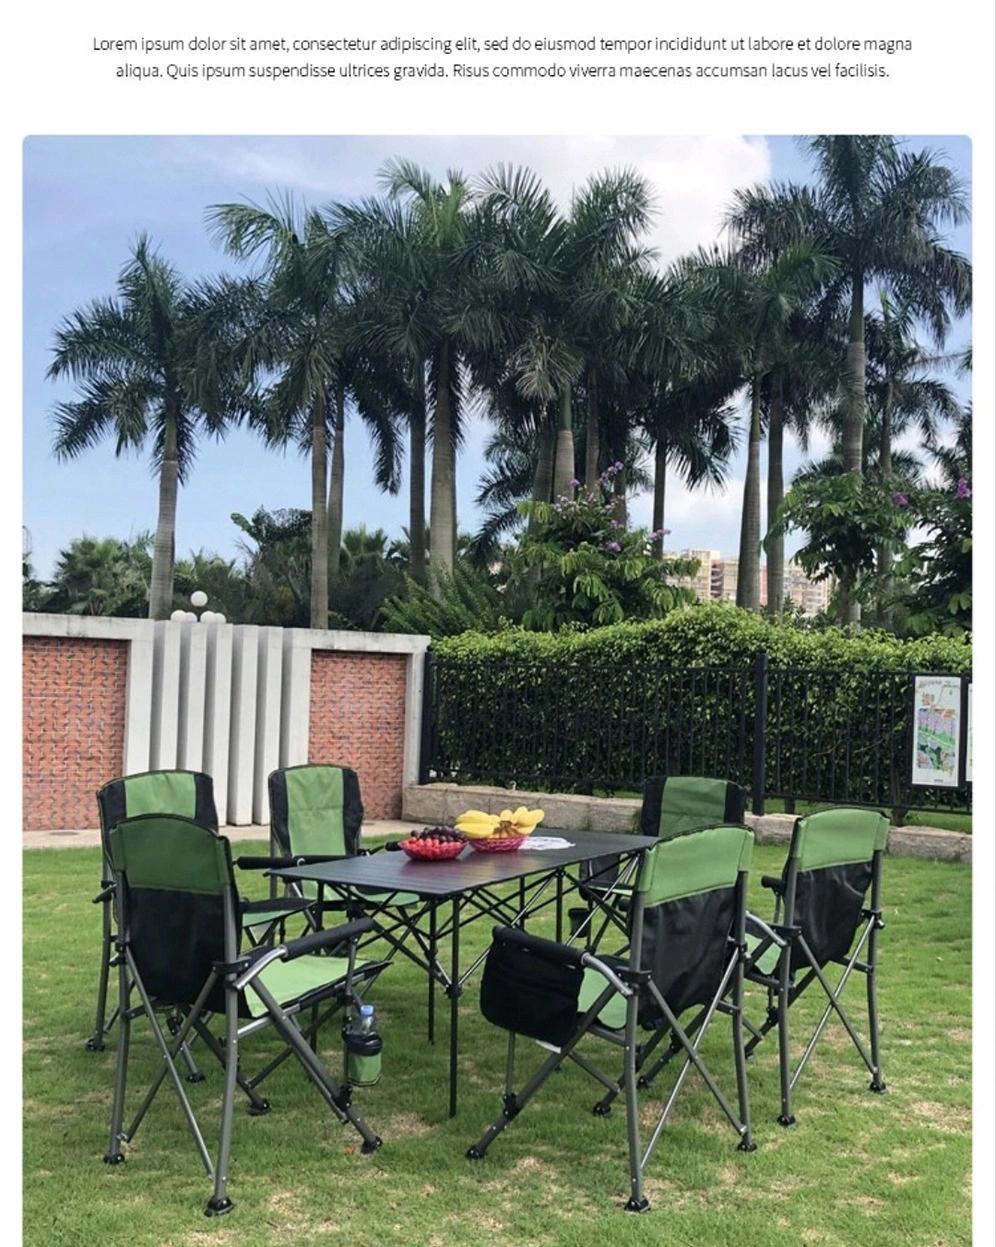 One Table Six Chairs Outdoor Portable Folding Table Beach Chair Leisure Seat Outdoor Camping Lounge Chair Seven Piece Set